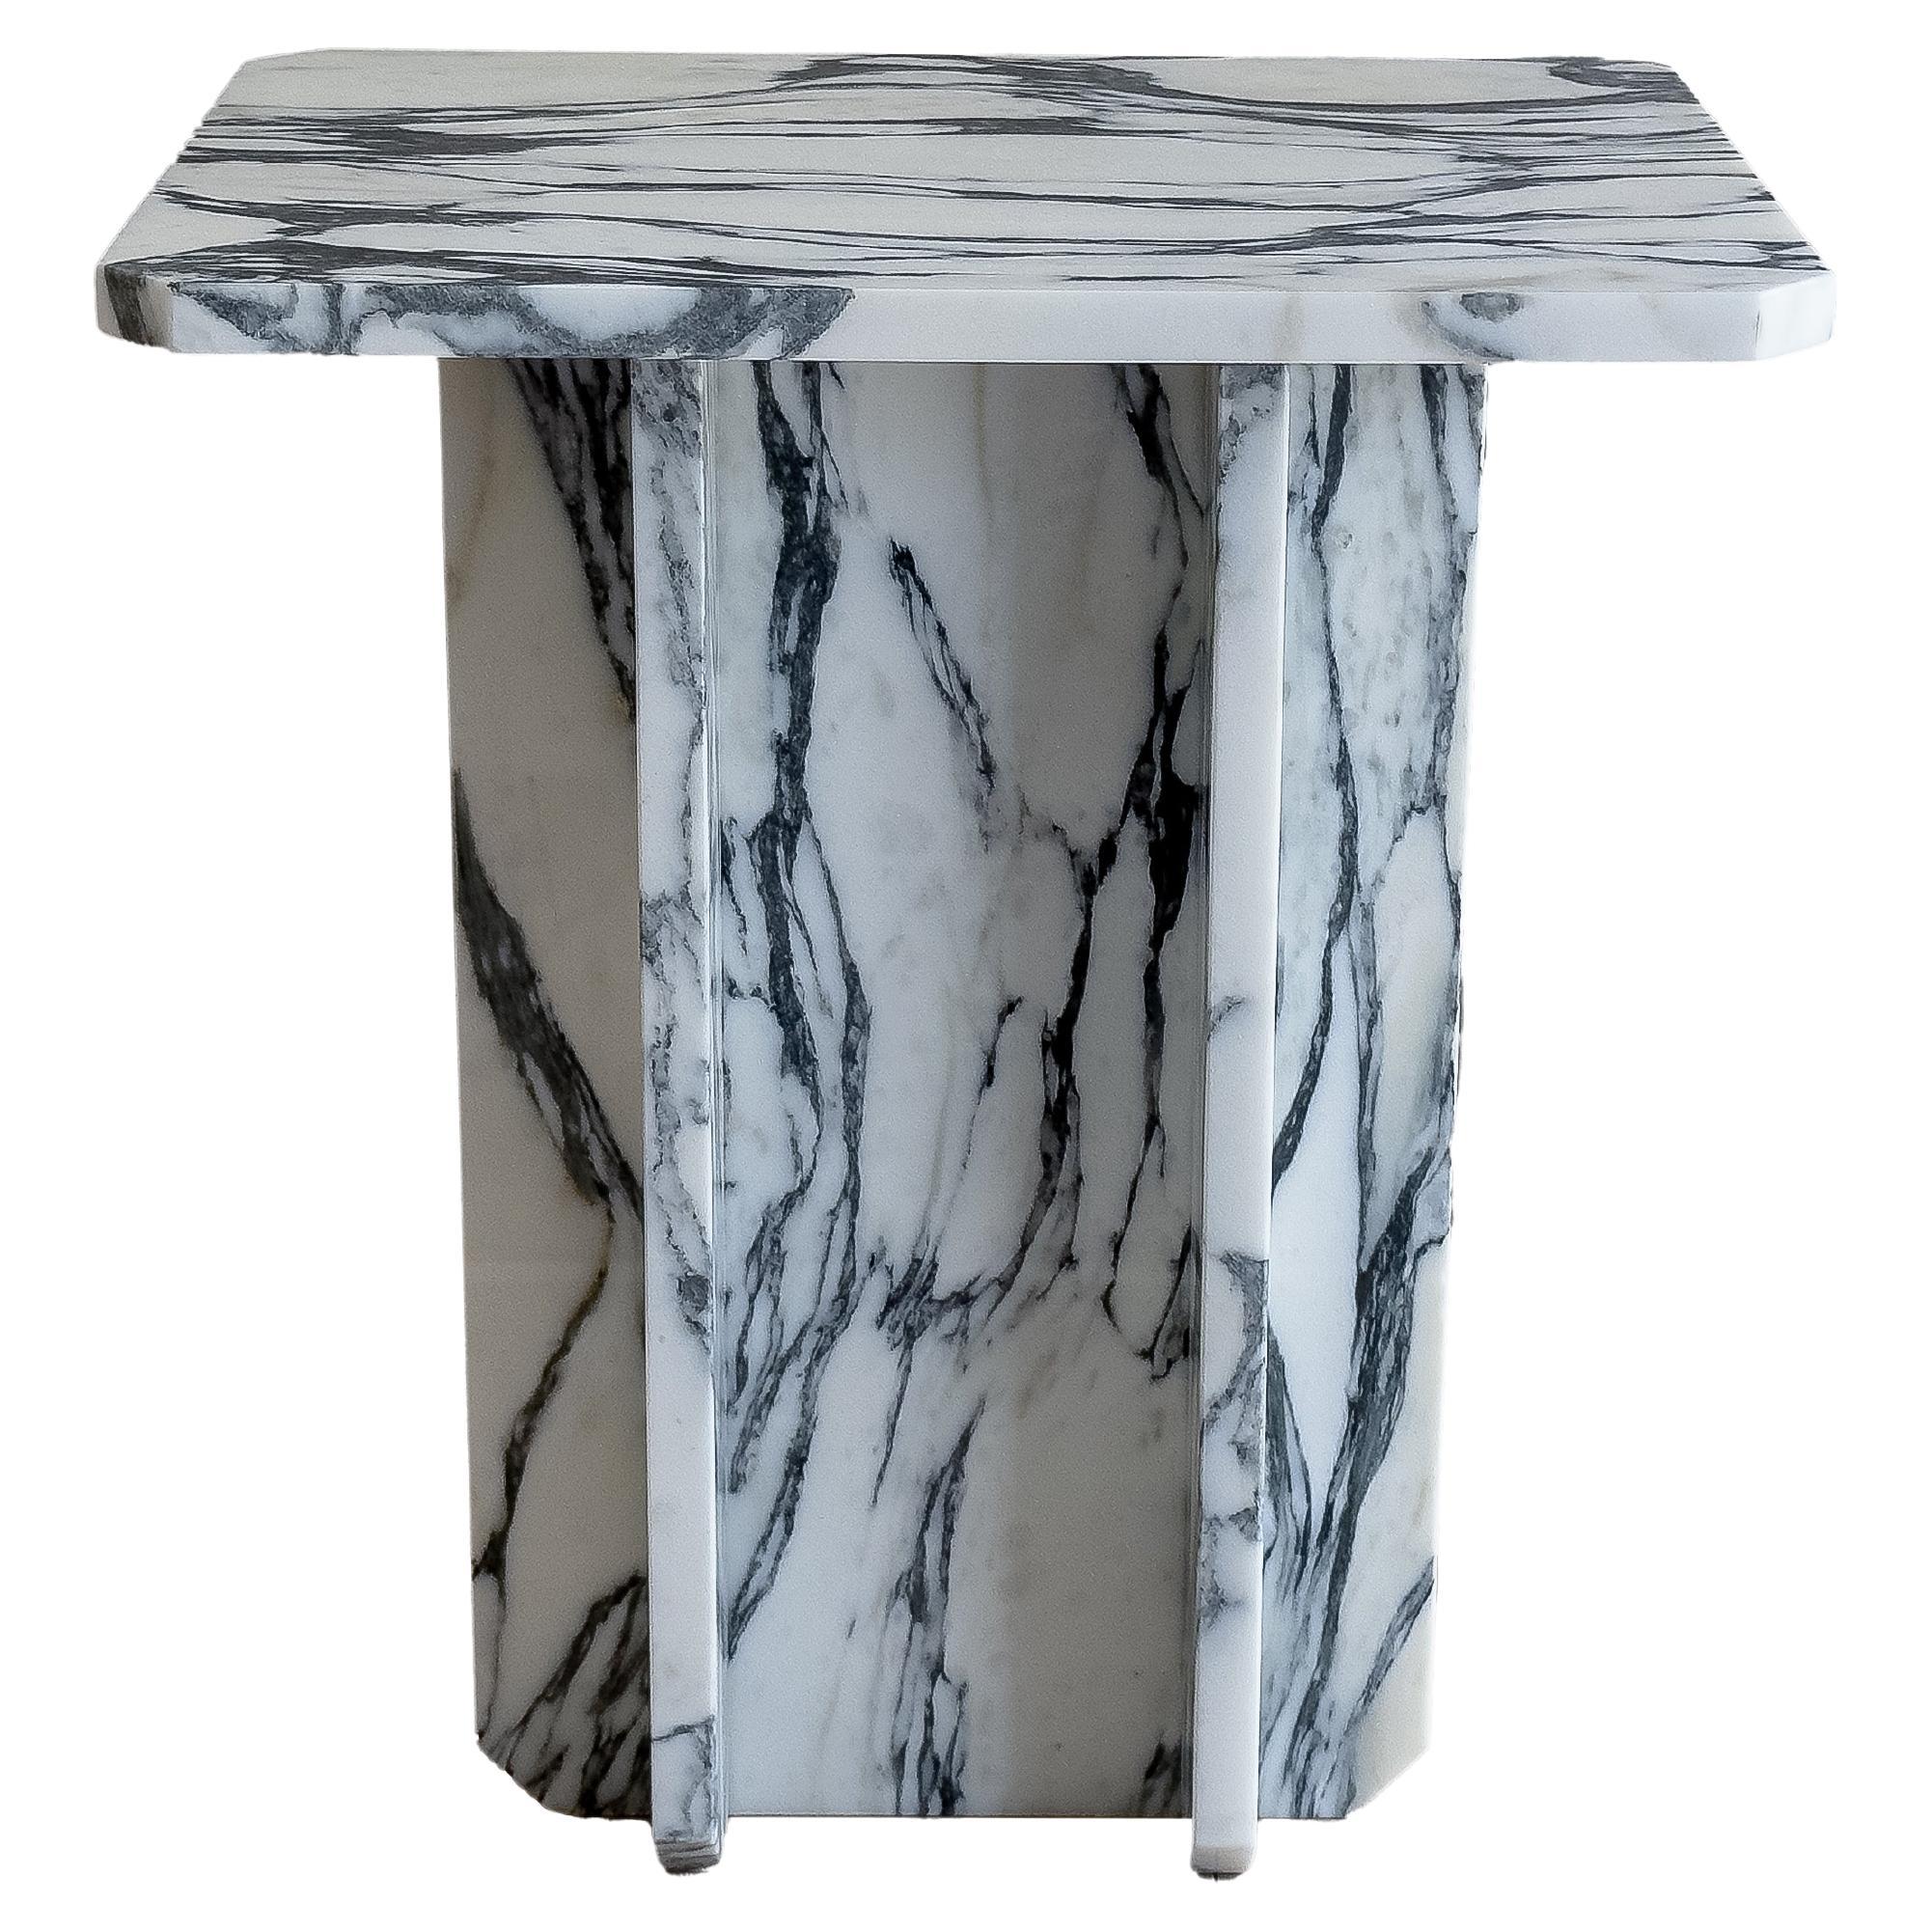 HASH Side Table in Arabescato Marble by Meble Matters